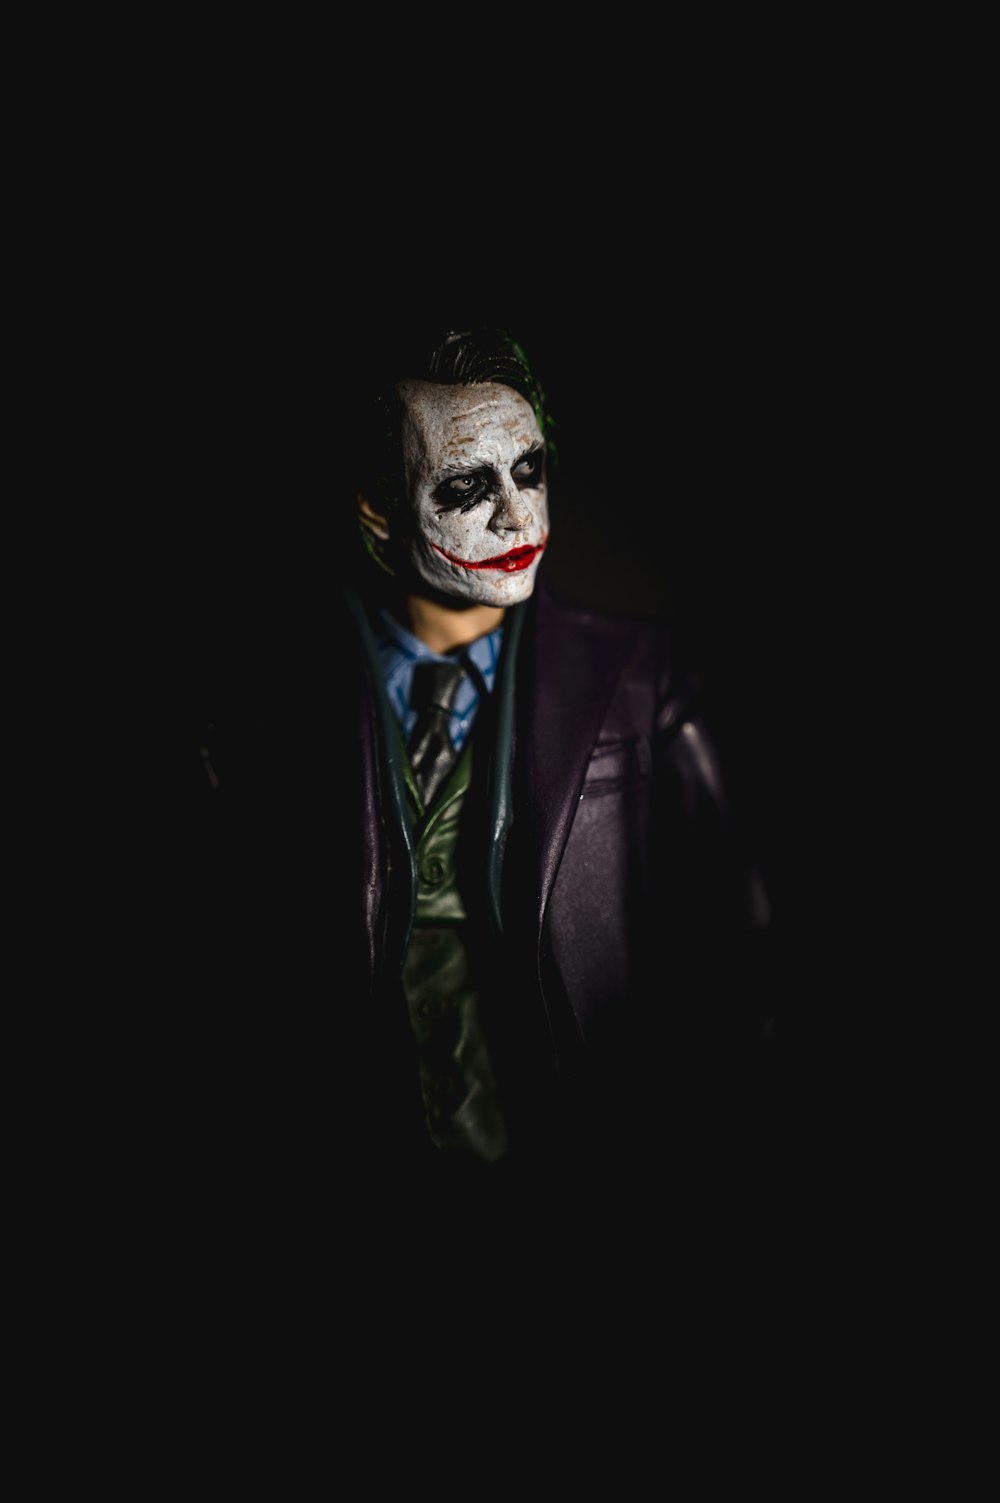 Ultimate Collection of Joker Images Download – Explore and Download over 999+ Stunning Joker Images in Full 4K